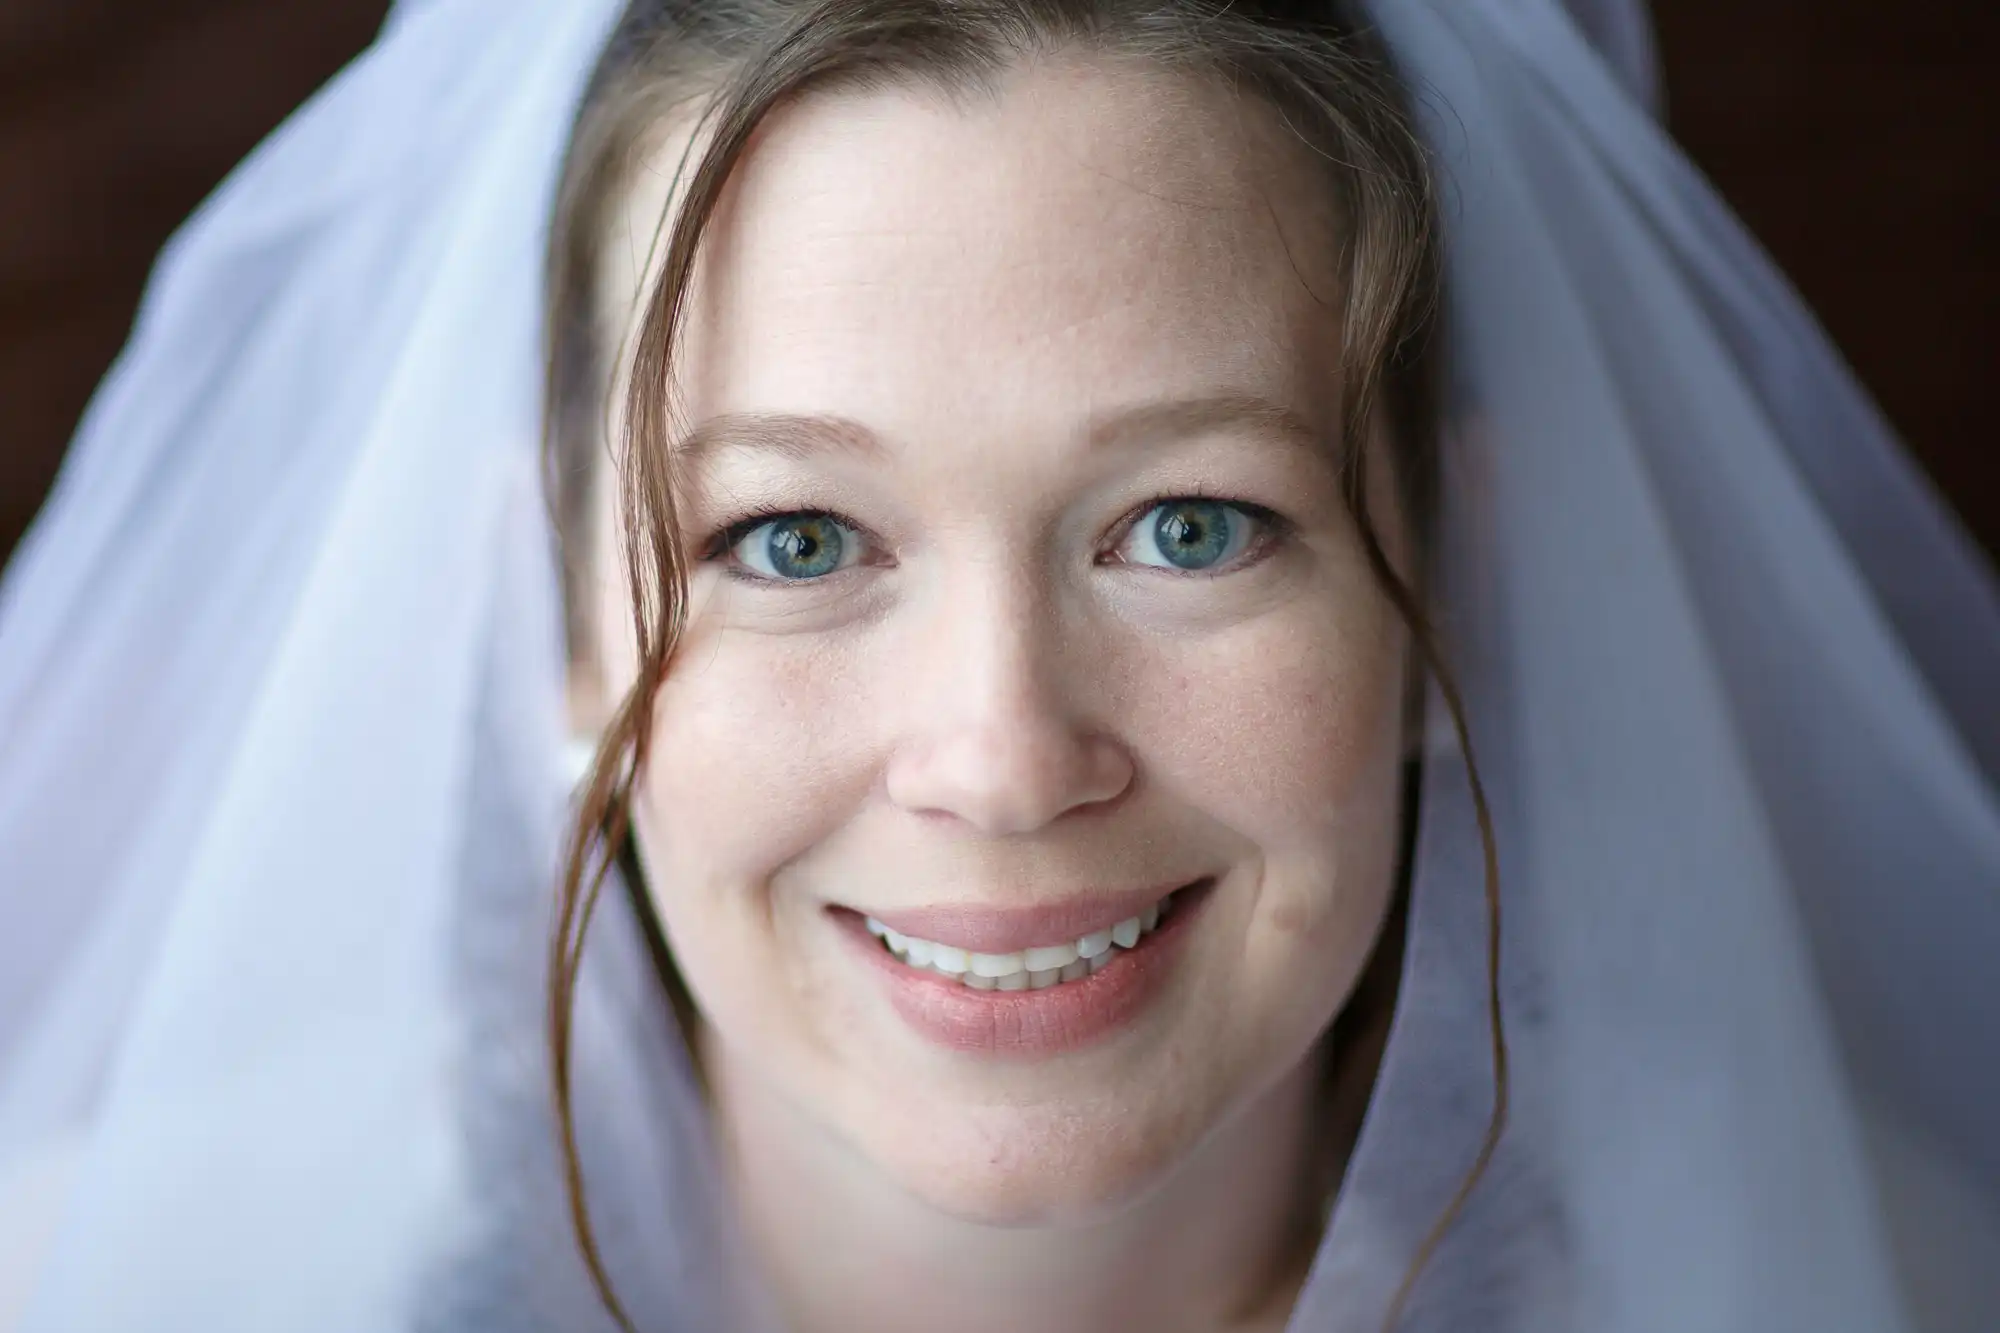 A close-up portrait of a smiling bride with bright blue eyes, draped in a white veil.